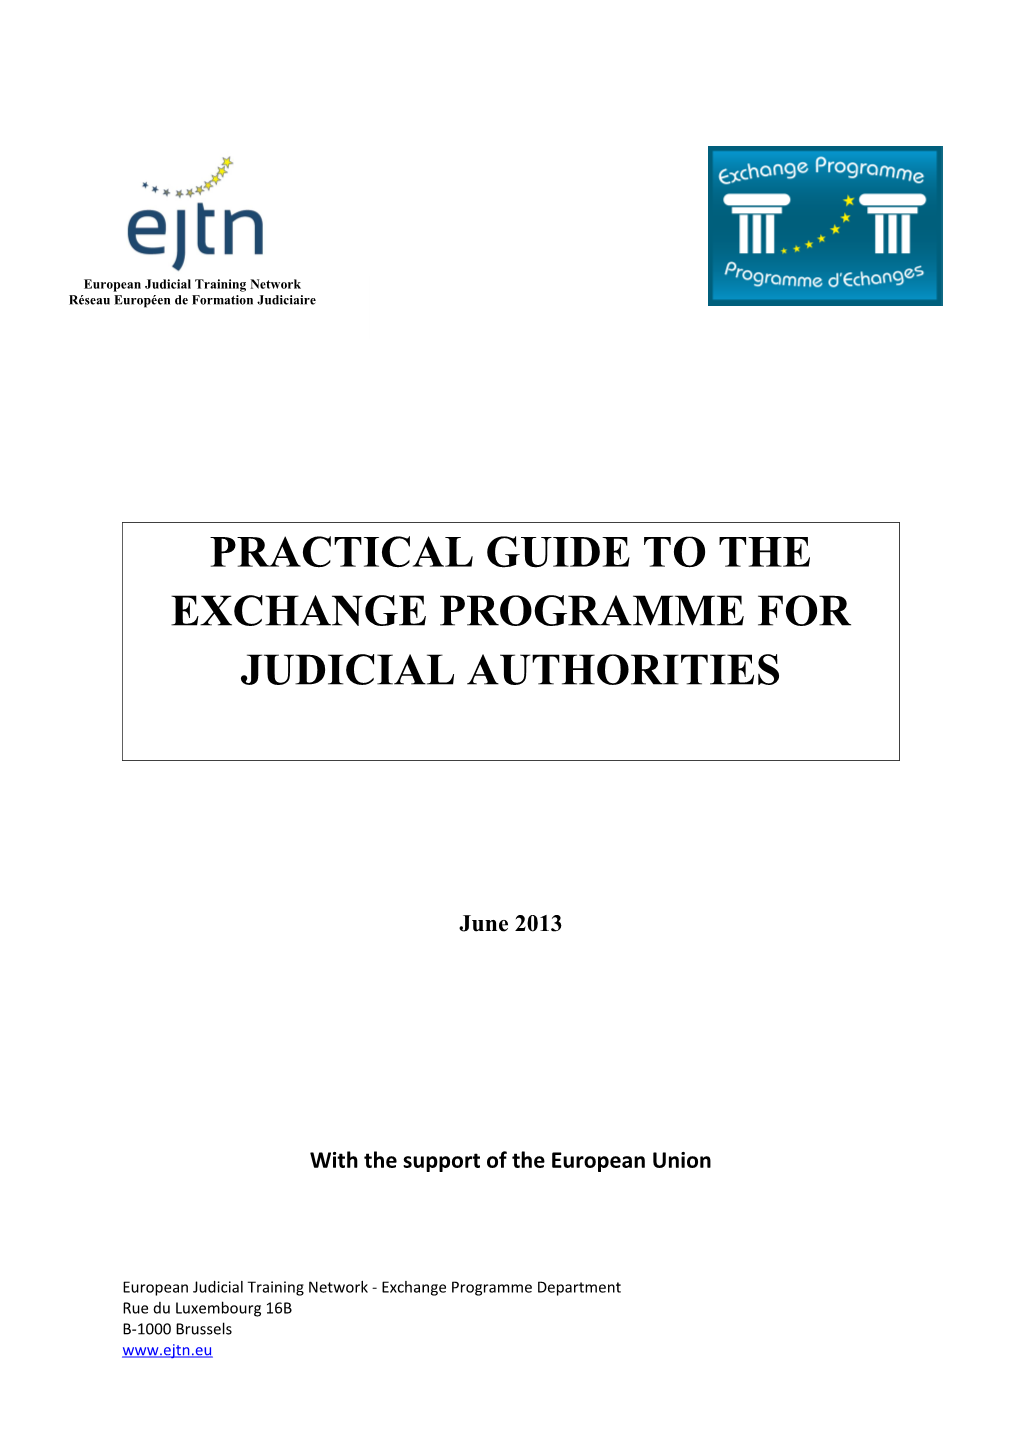 Practical Guide to the Exchange Programme for Judicial Authorities